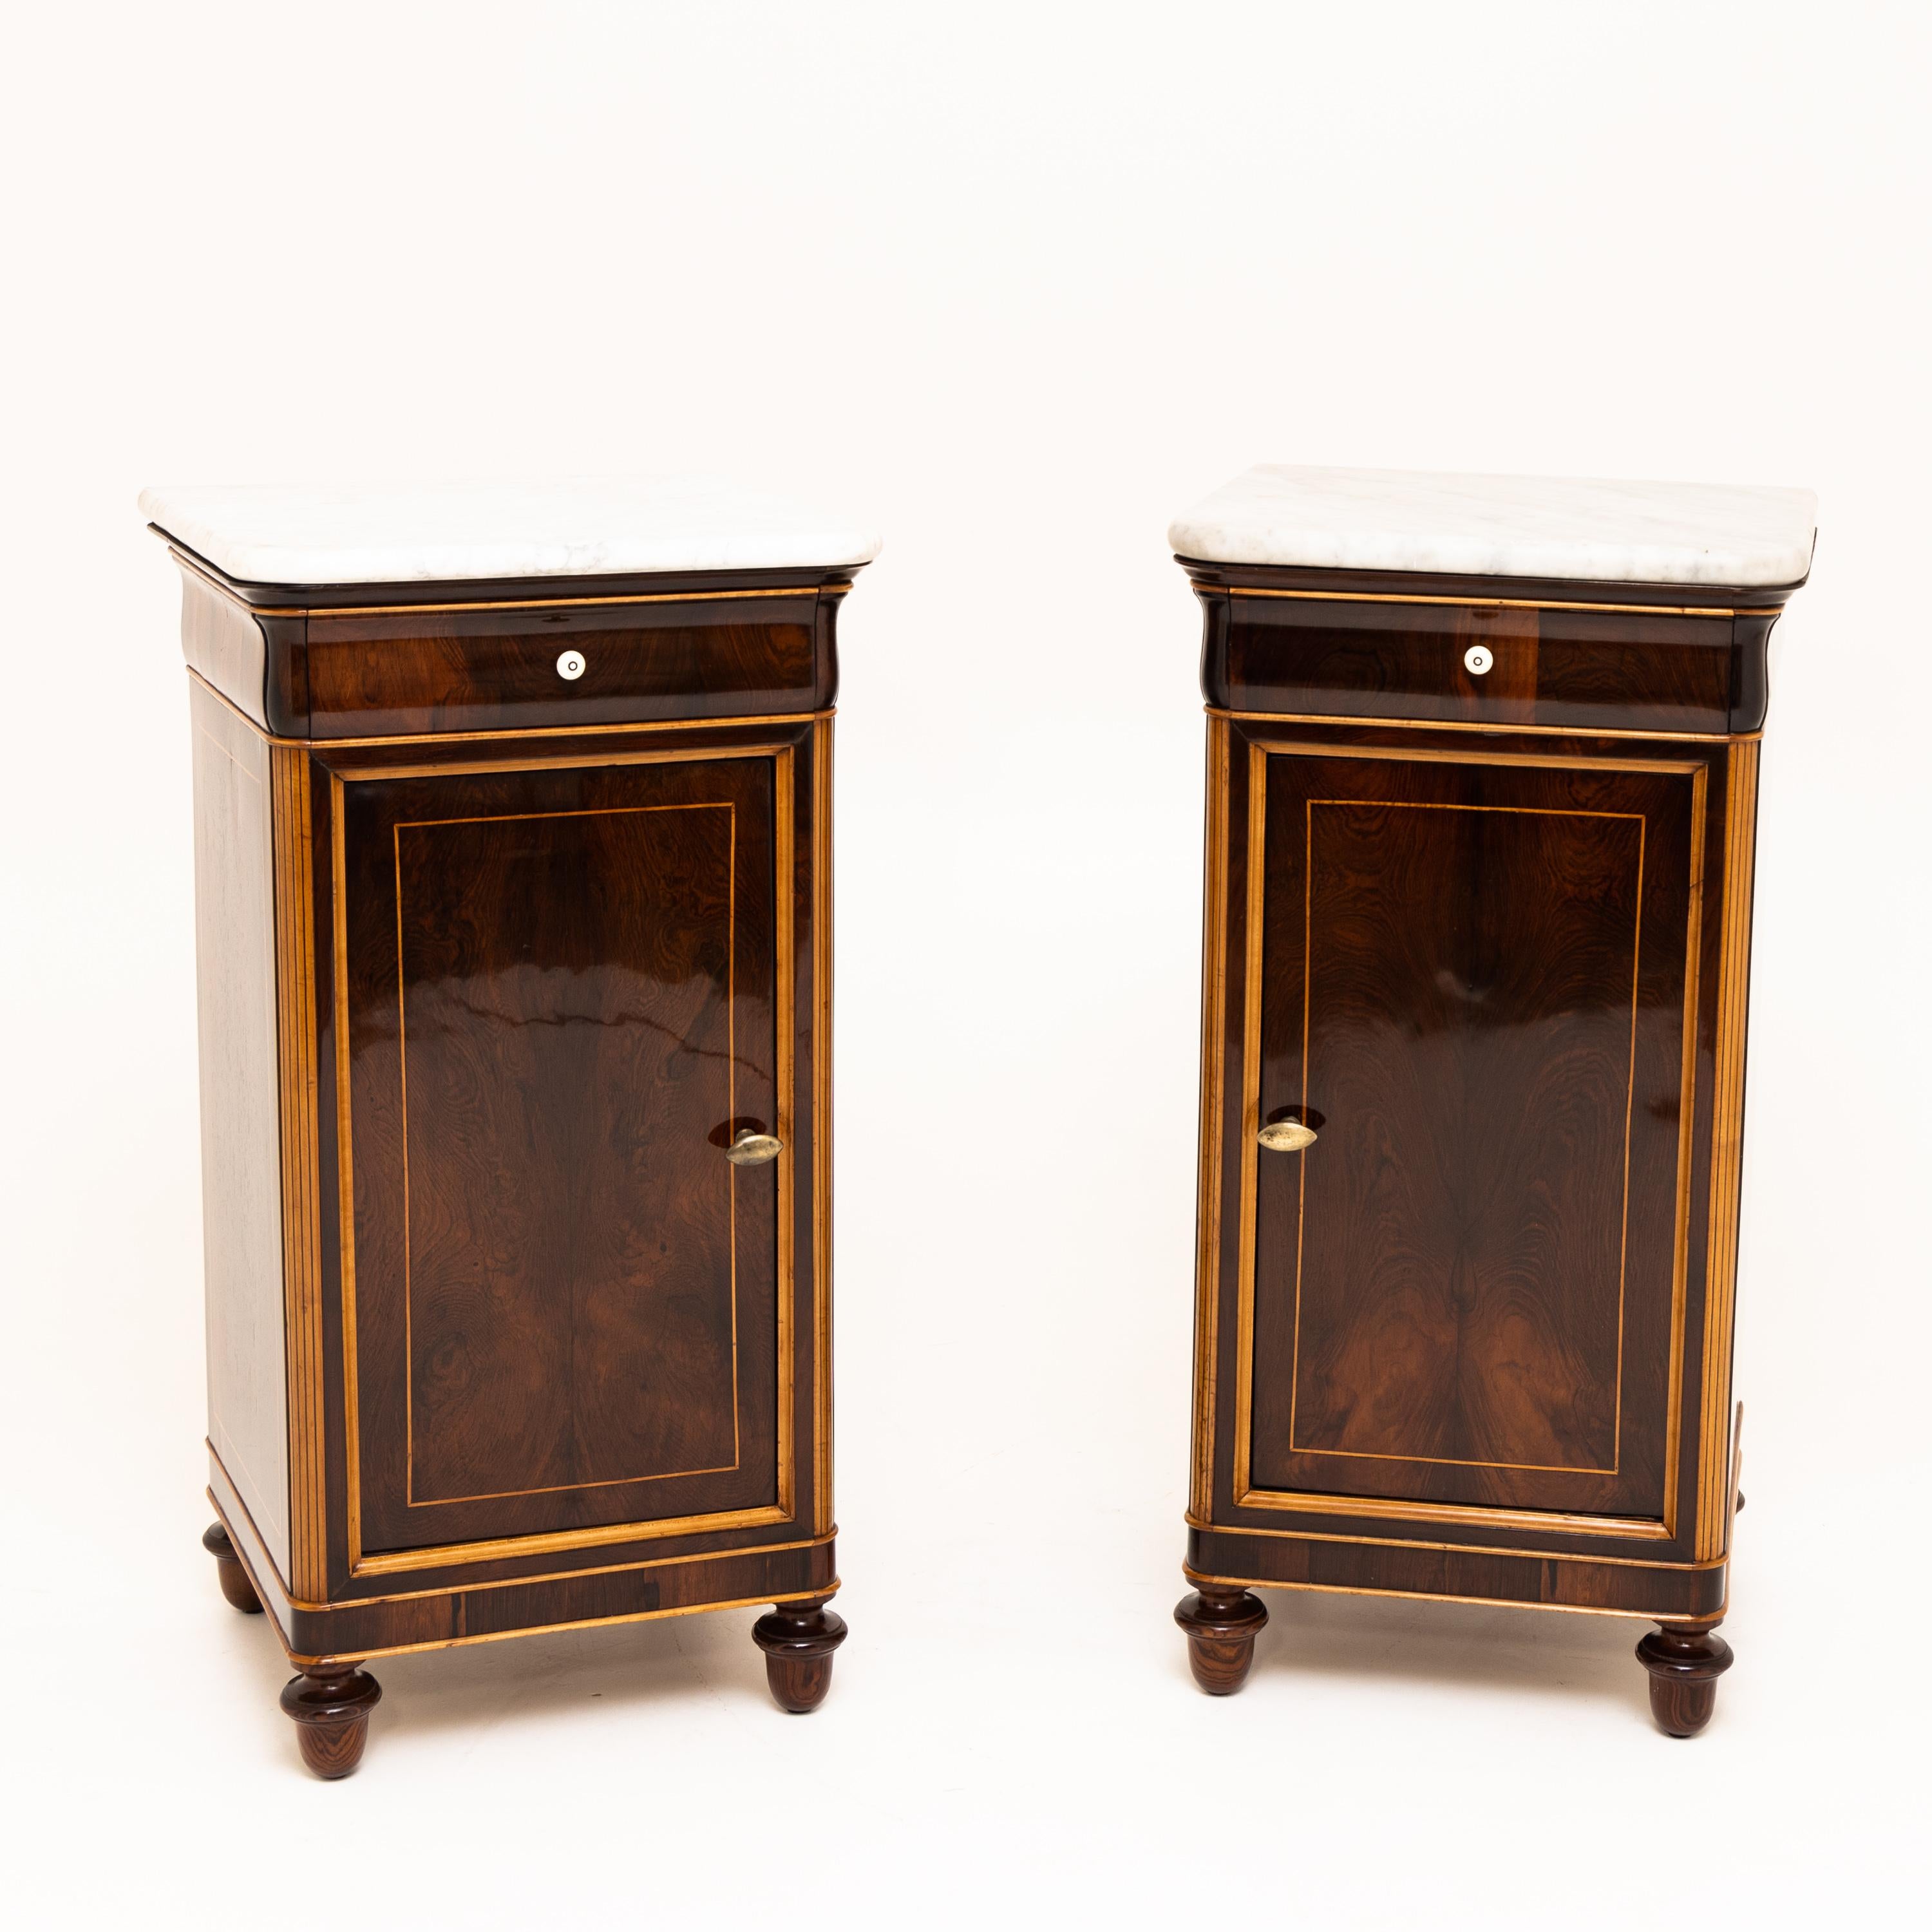 European Pair of Mahogany and Marble Louis Philippe Nightstands, Mid-19th Century